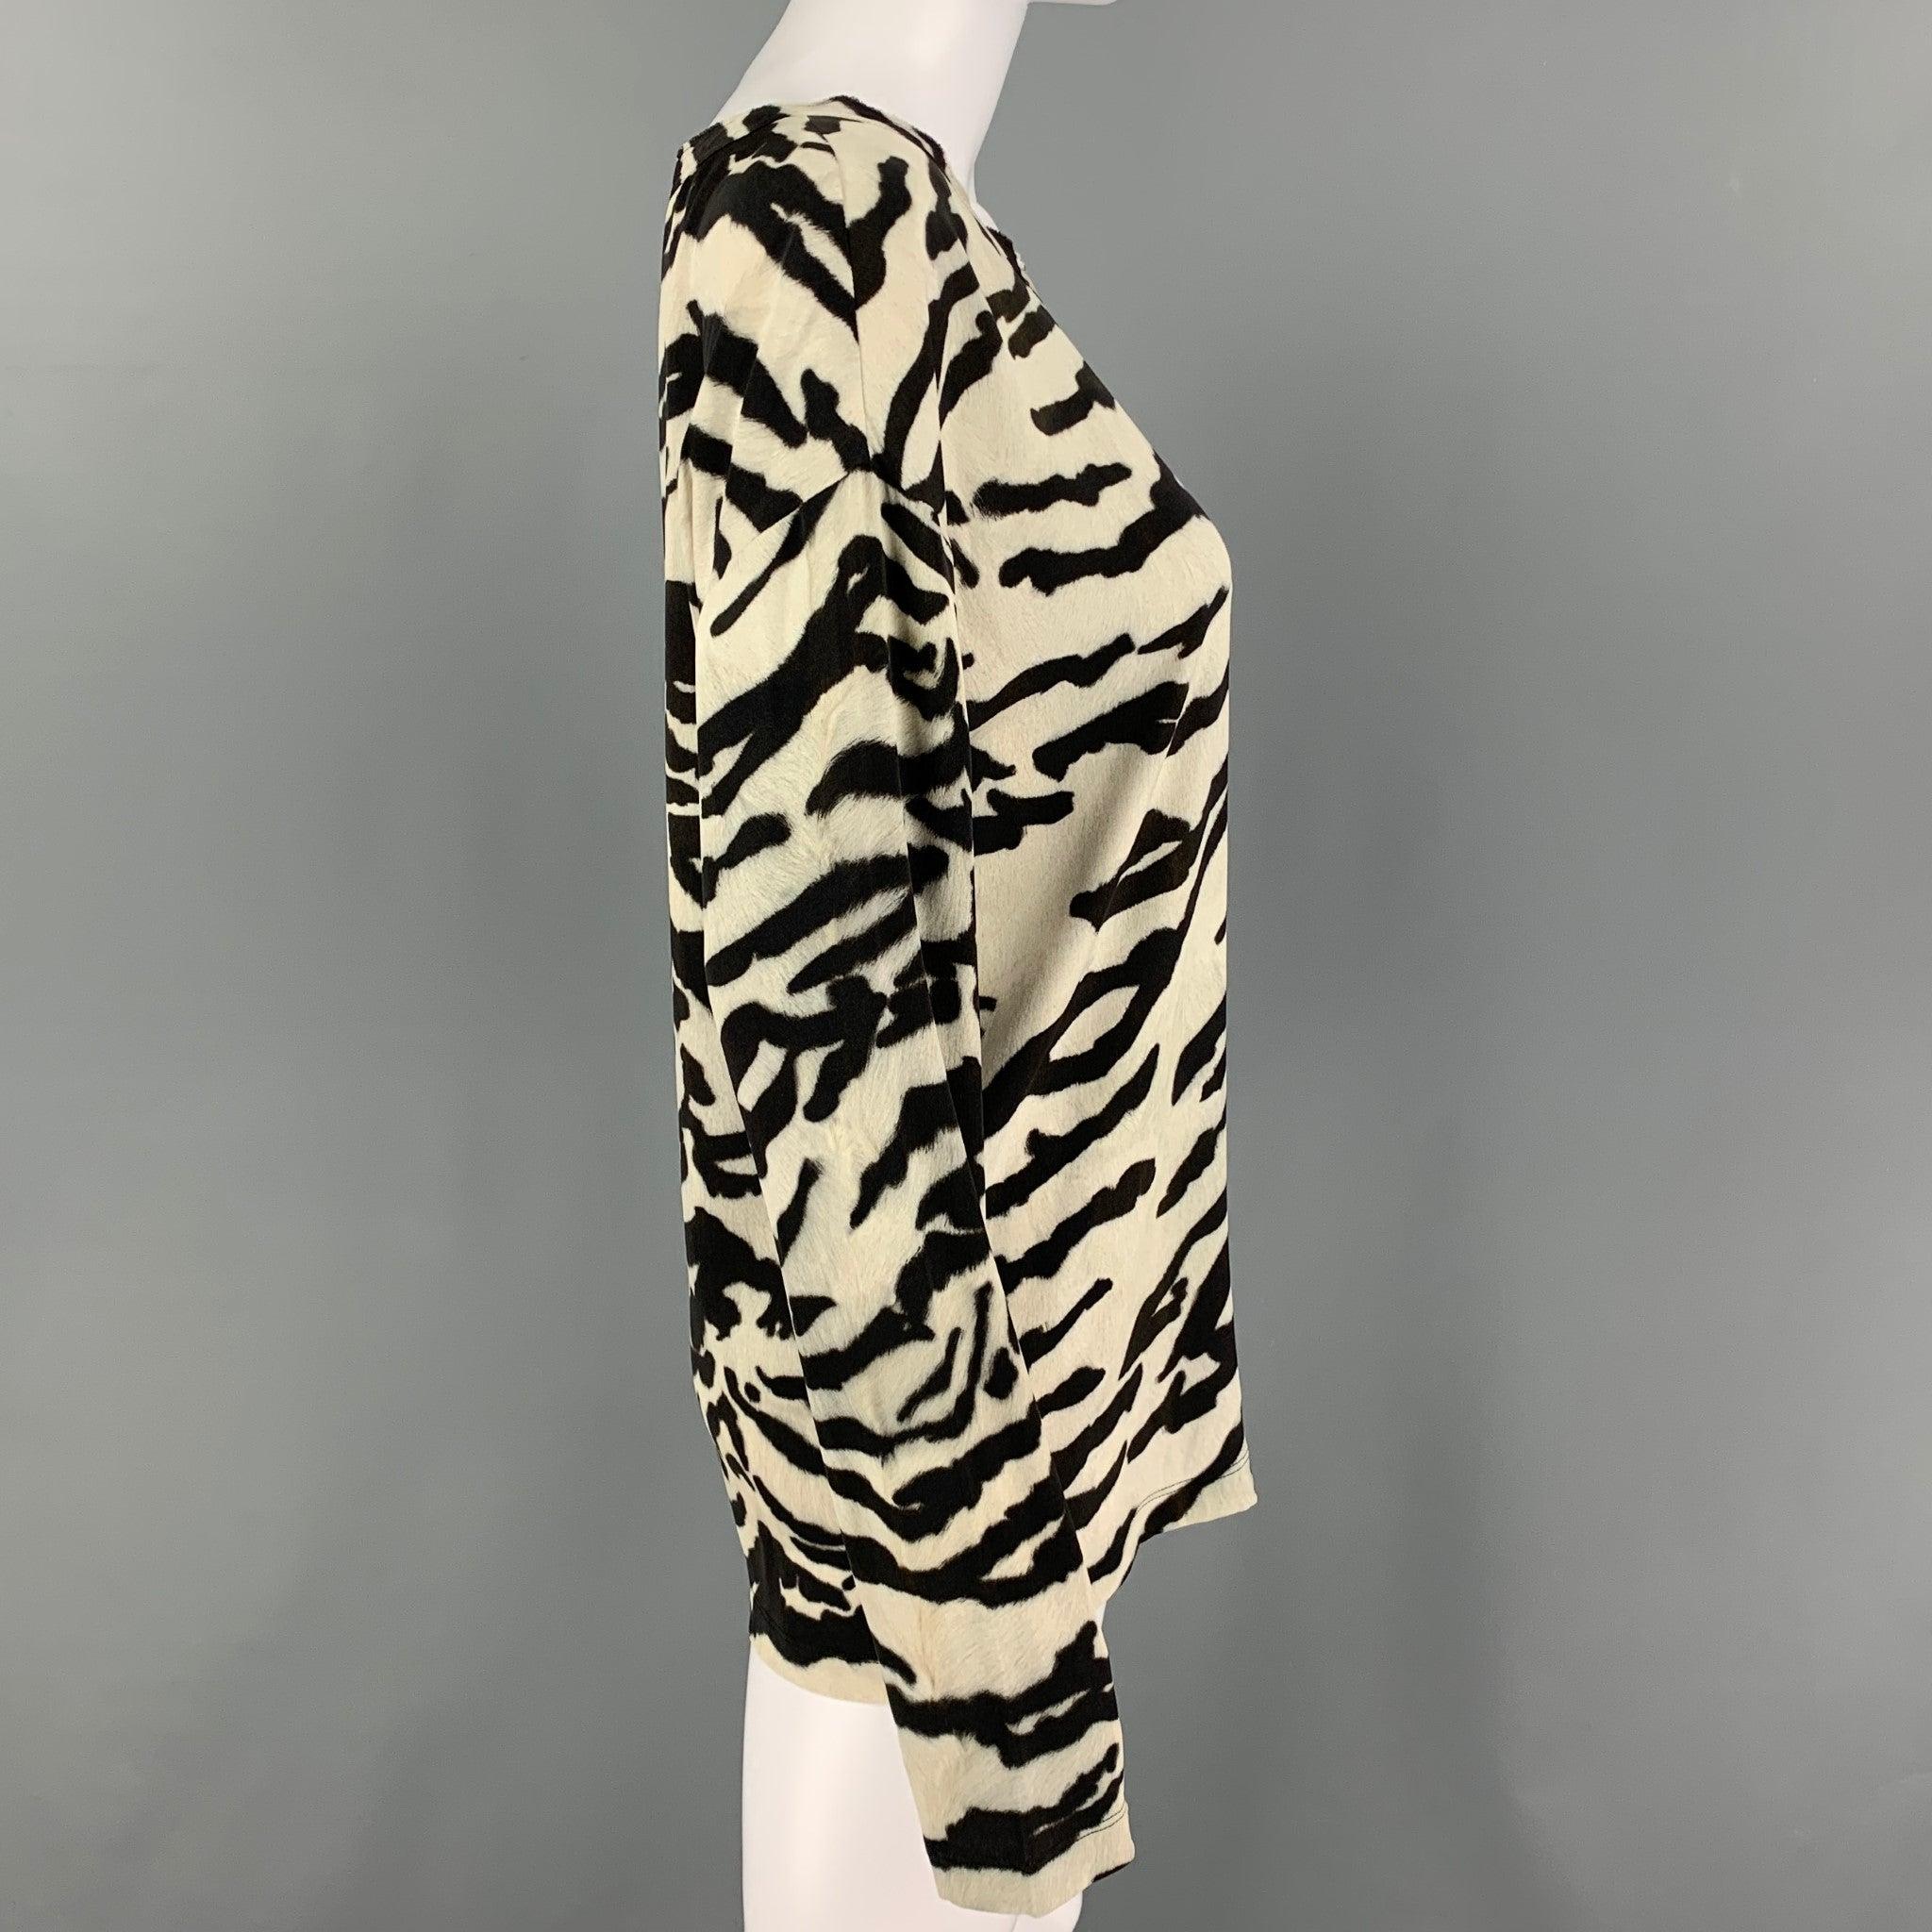 DOLCE & GABBANA casual top comes in a black & white animal print silk featuring a scoop neckline. Made in Italy.
Excellent
Pre-Owned Condition. 

Marked:   42 

Measurements: 
 
Shoulder: 22 inches Bust: 38 inches Sleeve: 21.5 inches Length: 24.5